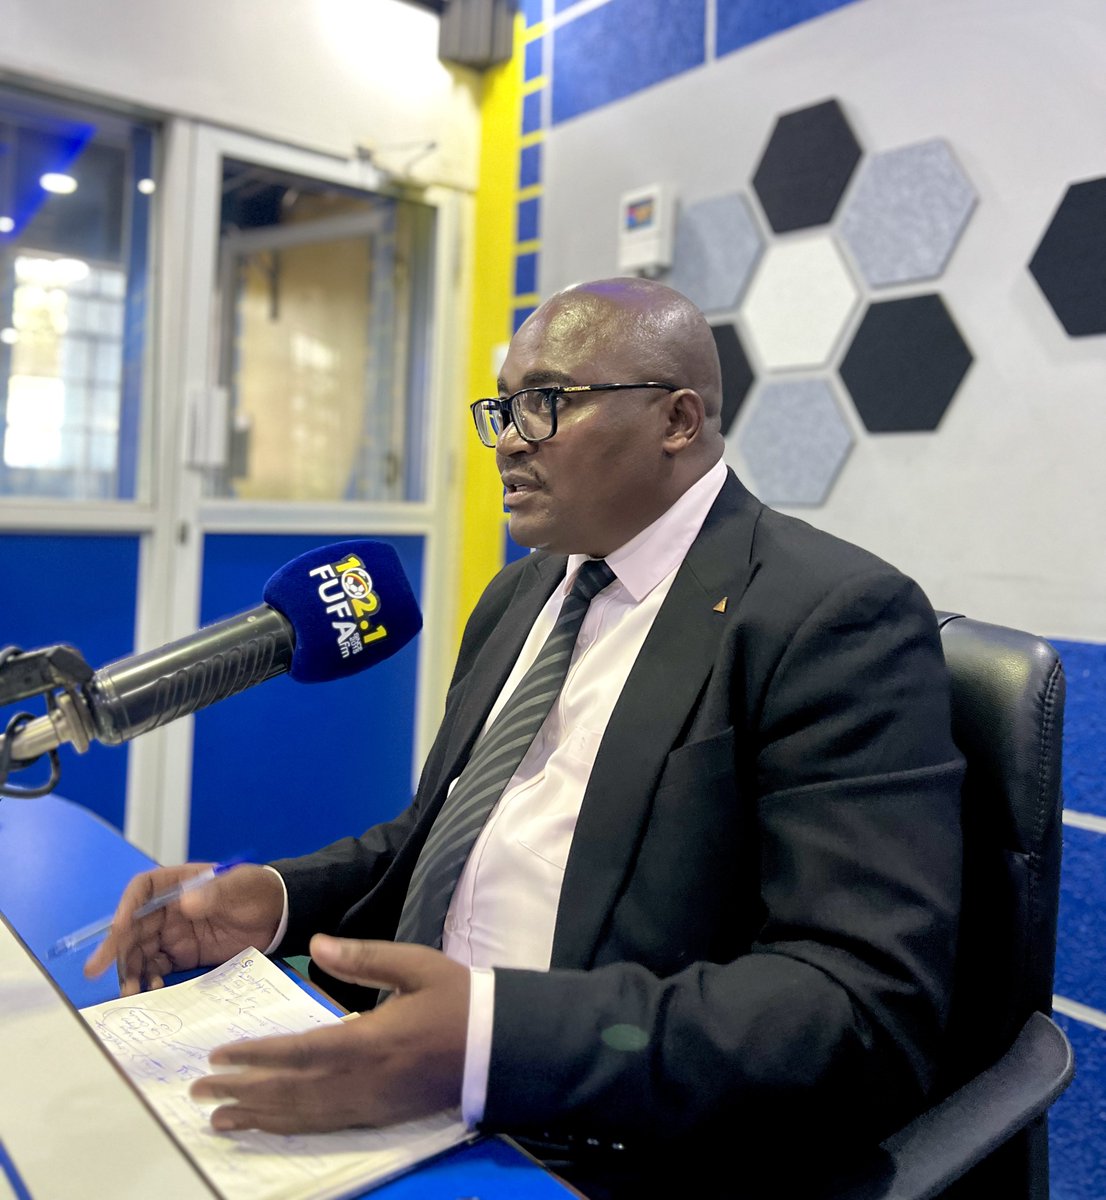 'As the league, it is our responsibility to educate and raise awareness among stakeholders about the rules and regulations governing the season.” ~ Bernard Bainamani, @UPL CEO #AmakyaAmawomu | #TheFootballRadio